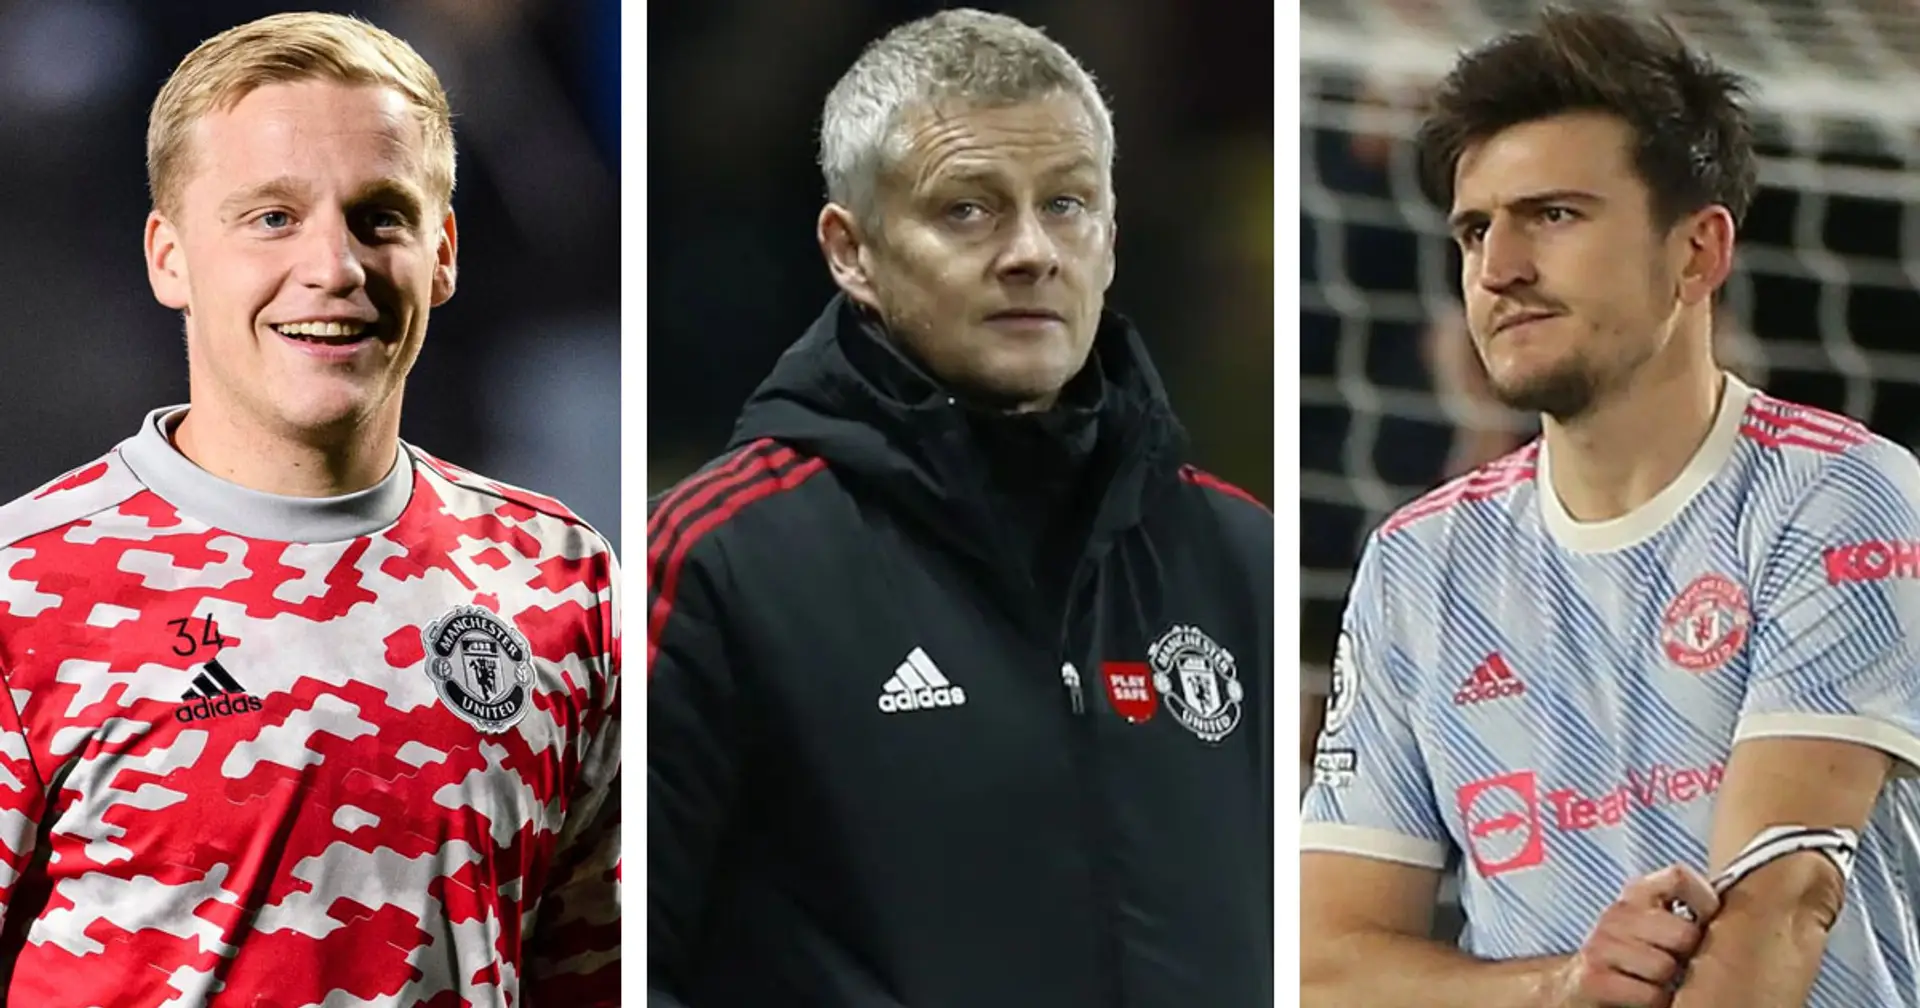 4 winners and 3 losers from Solskjaer's sacking as United manager